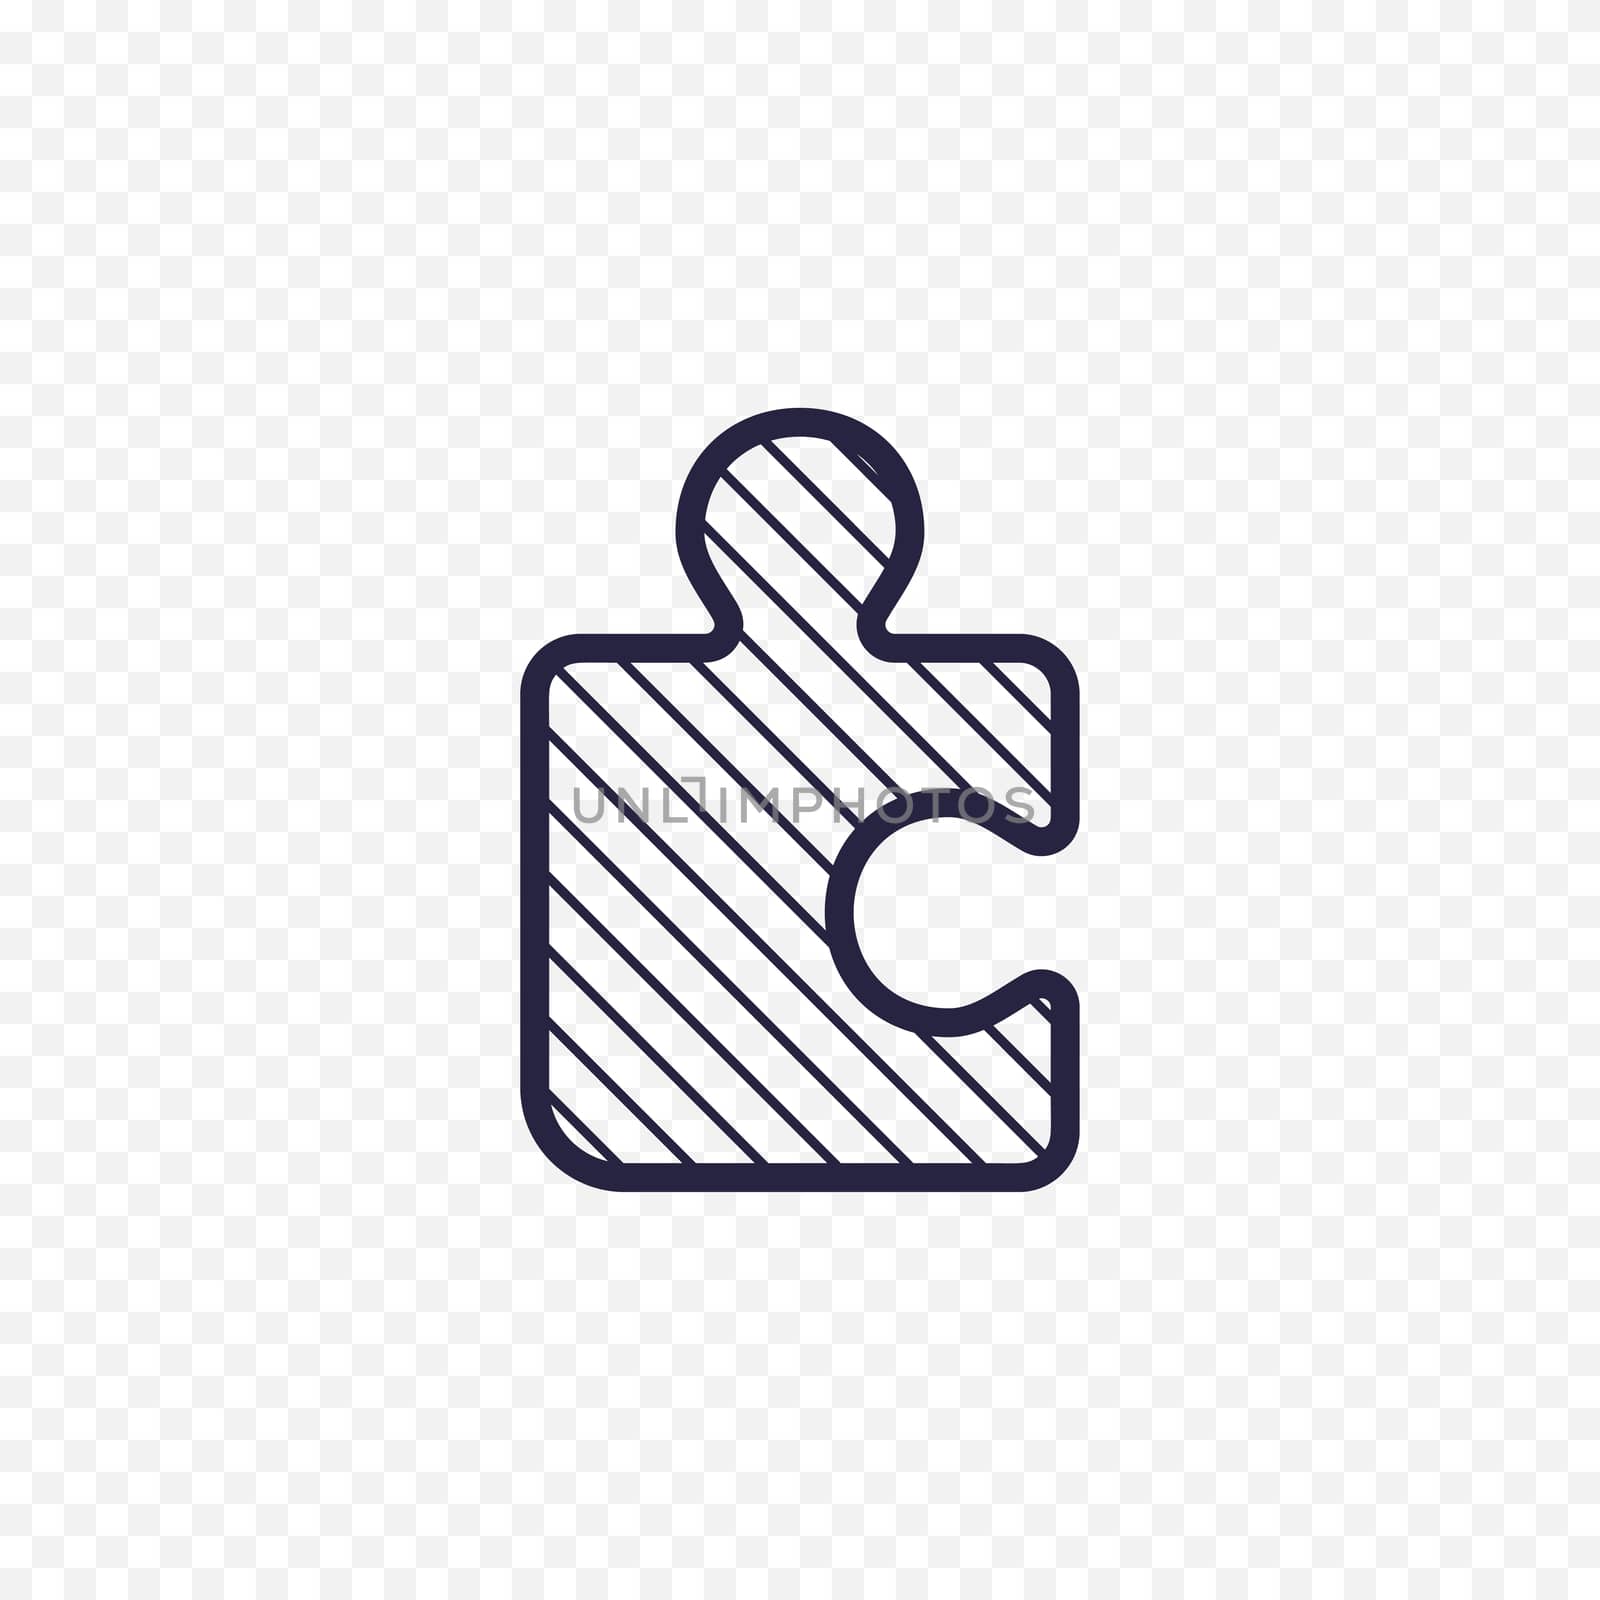 Puzzle game line icon. Jigsaw piece thin linear signs. Outline solution simple concept for websites, infographic, mobile app.